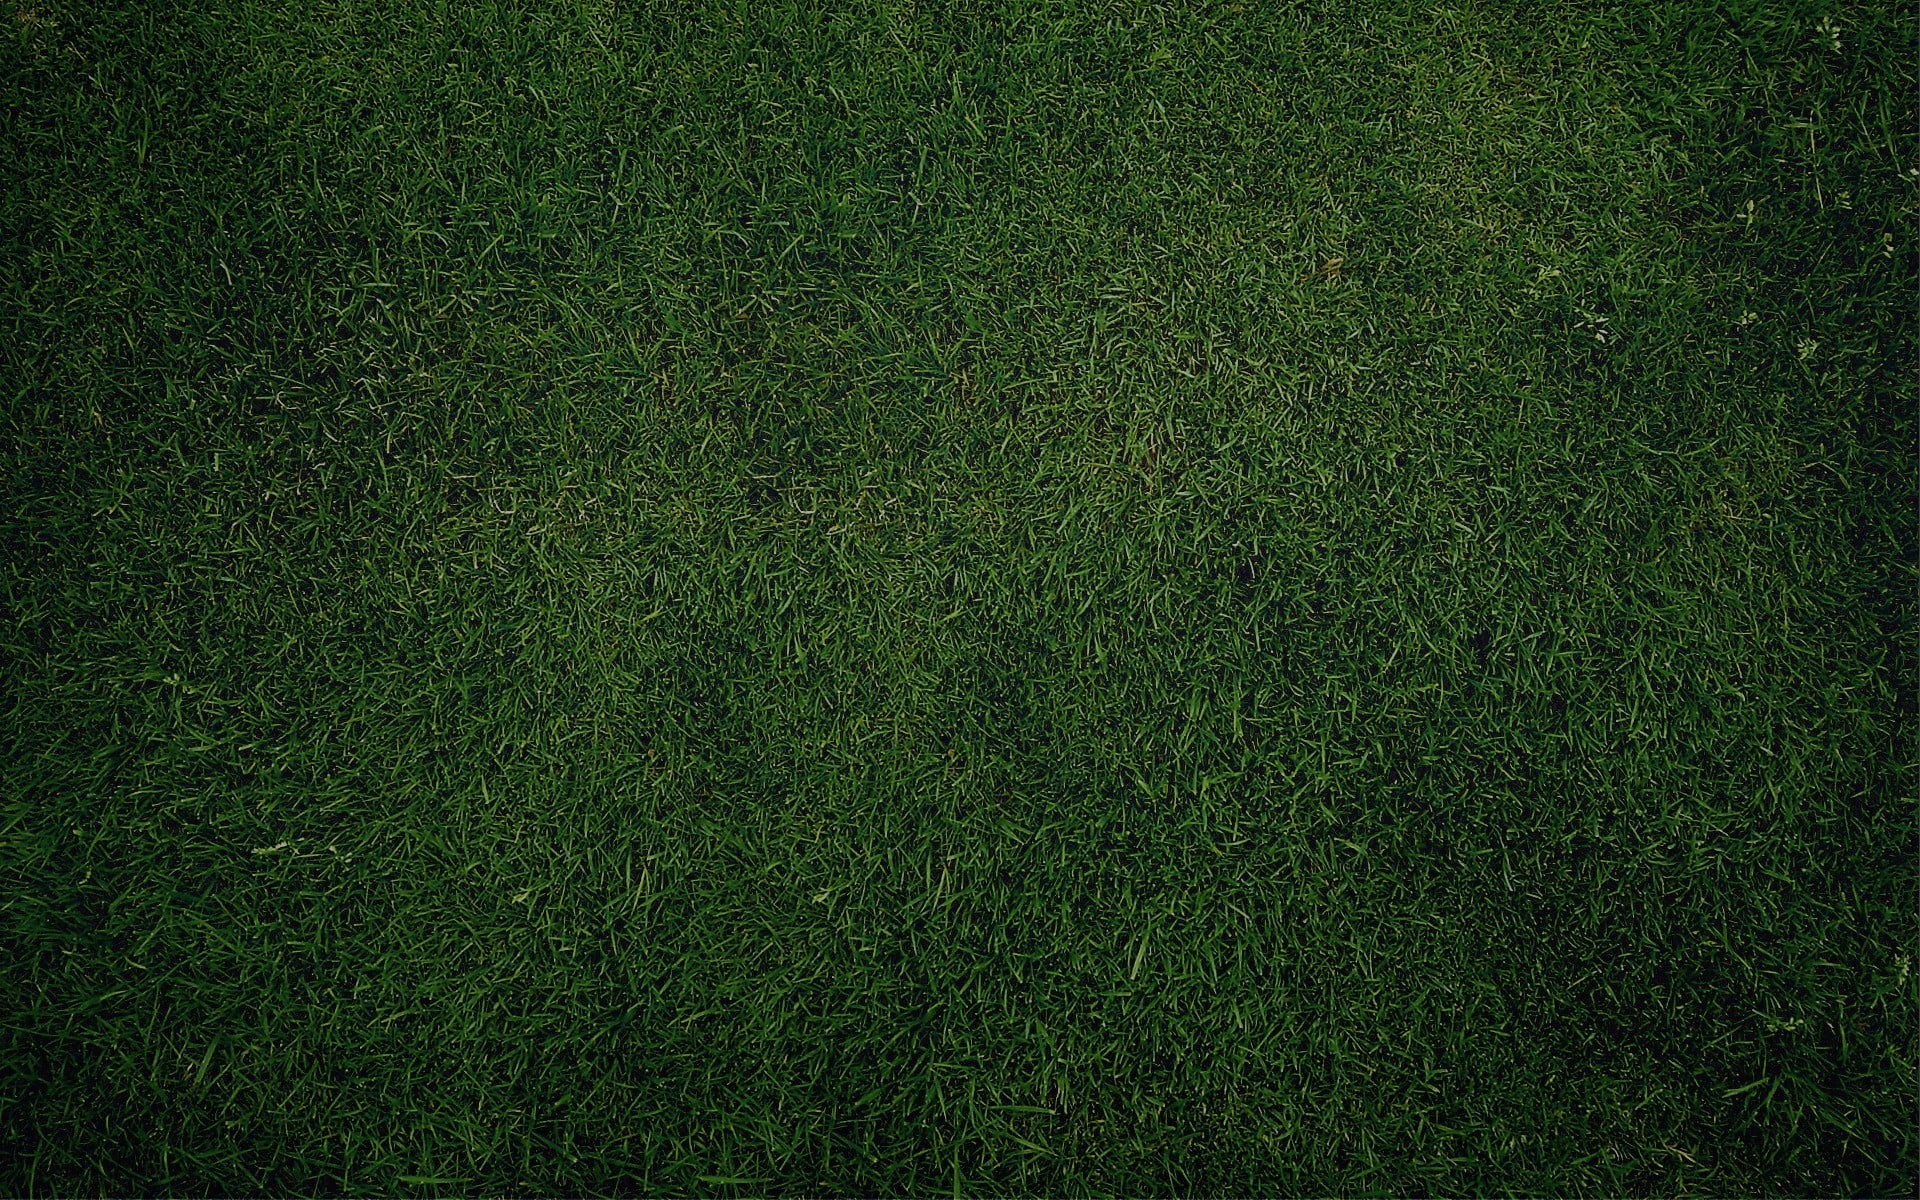 Wallpaper / 1080P, Close Up, Plant, Grass, Texture, Stadium, Lawn, Textured, Soccer, Environment, Green Color, Grass Area, Backdrop, Artificial, Full Frame, Pattern Free Download